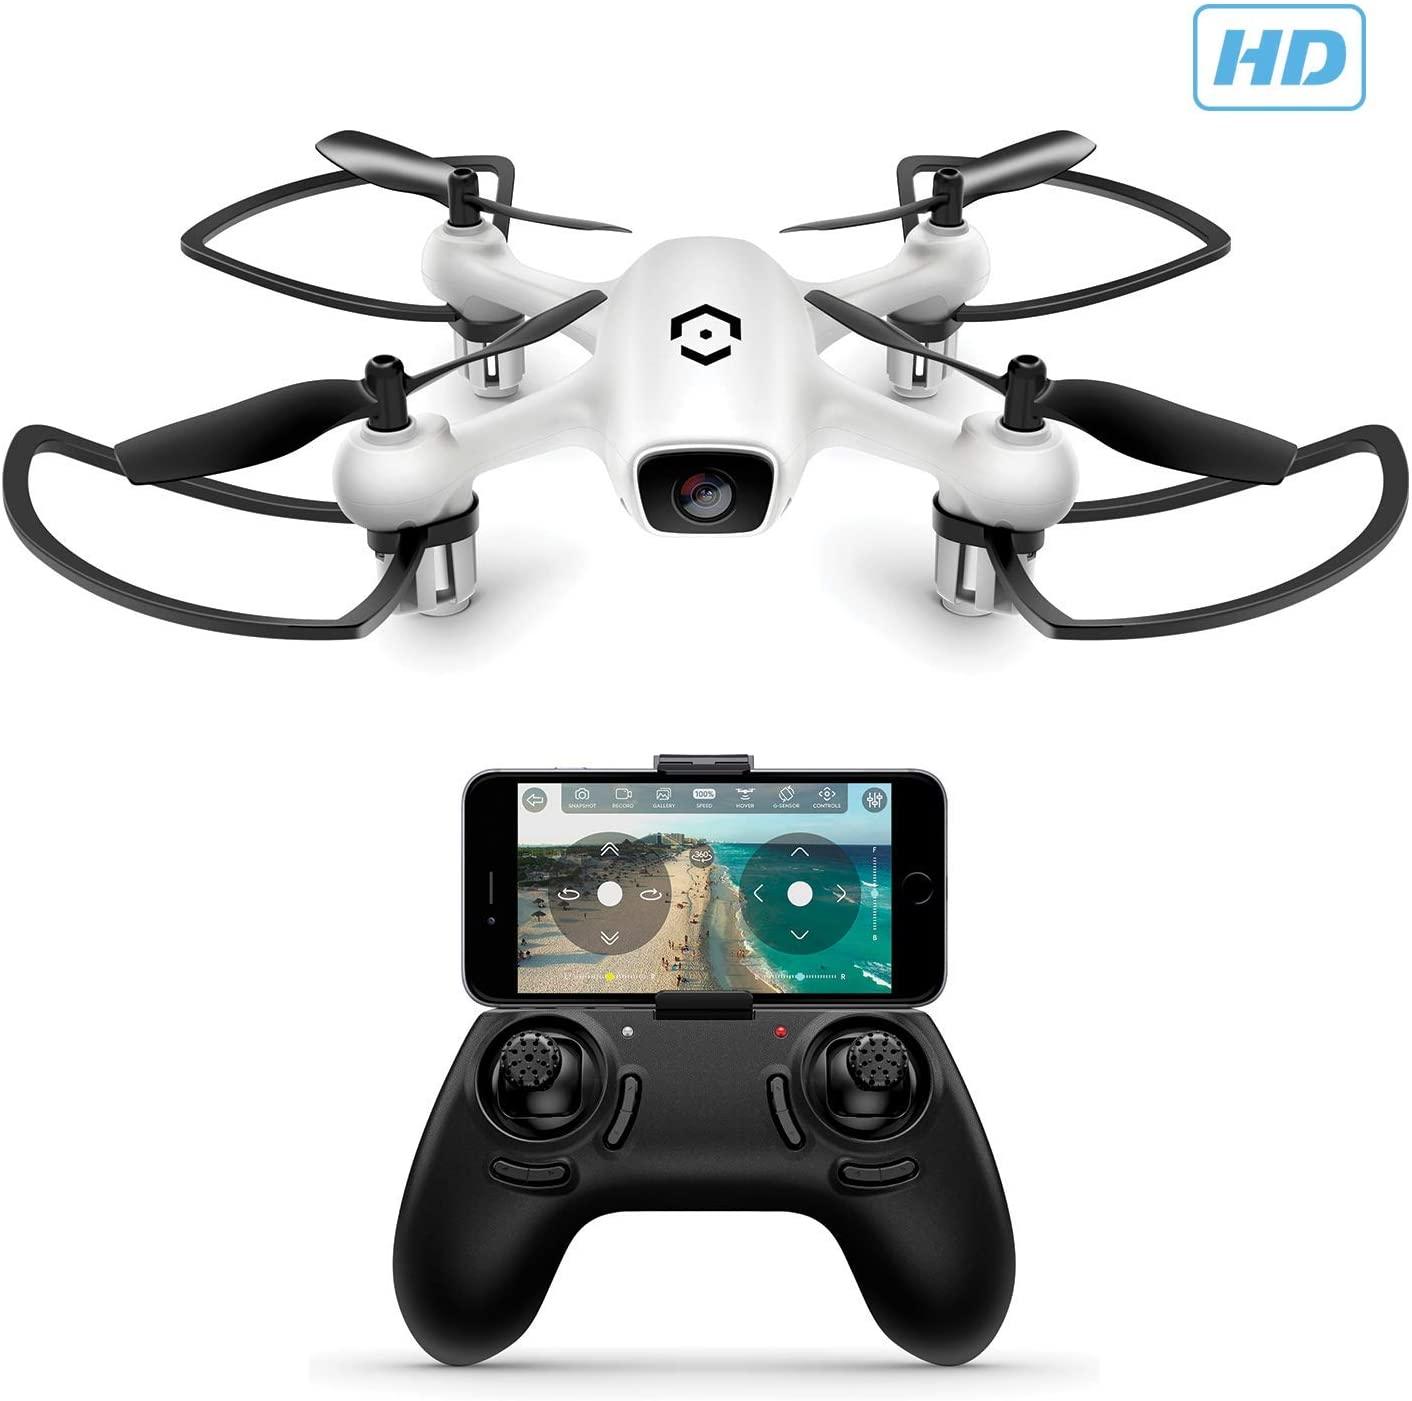 Amcrest A4-W Skyview WiFi Drone with Camera HD 720P FPV Quadcopter - RCDrone